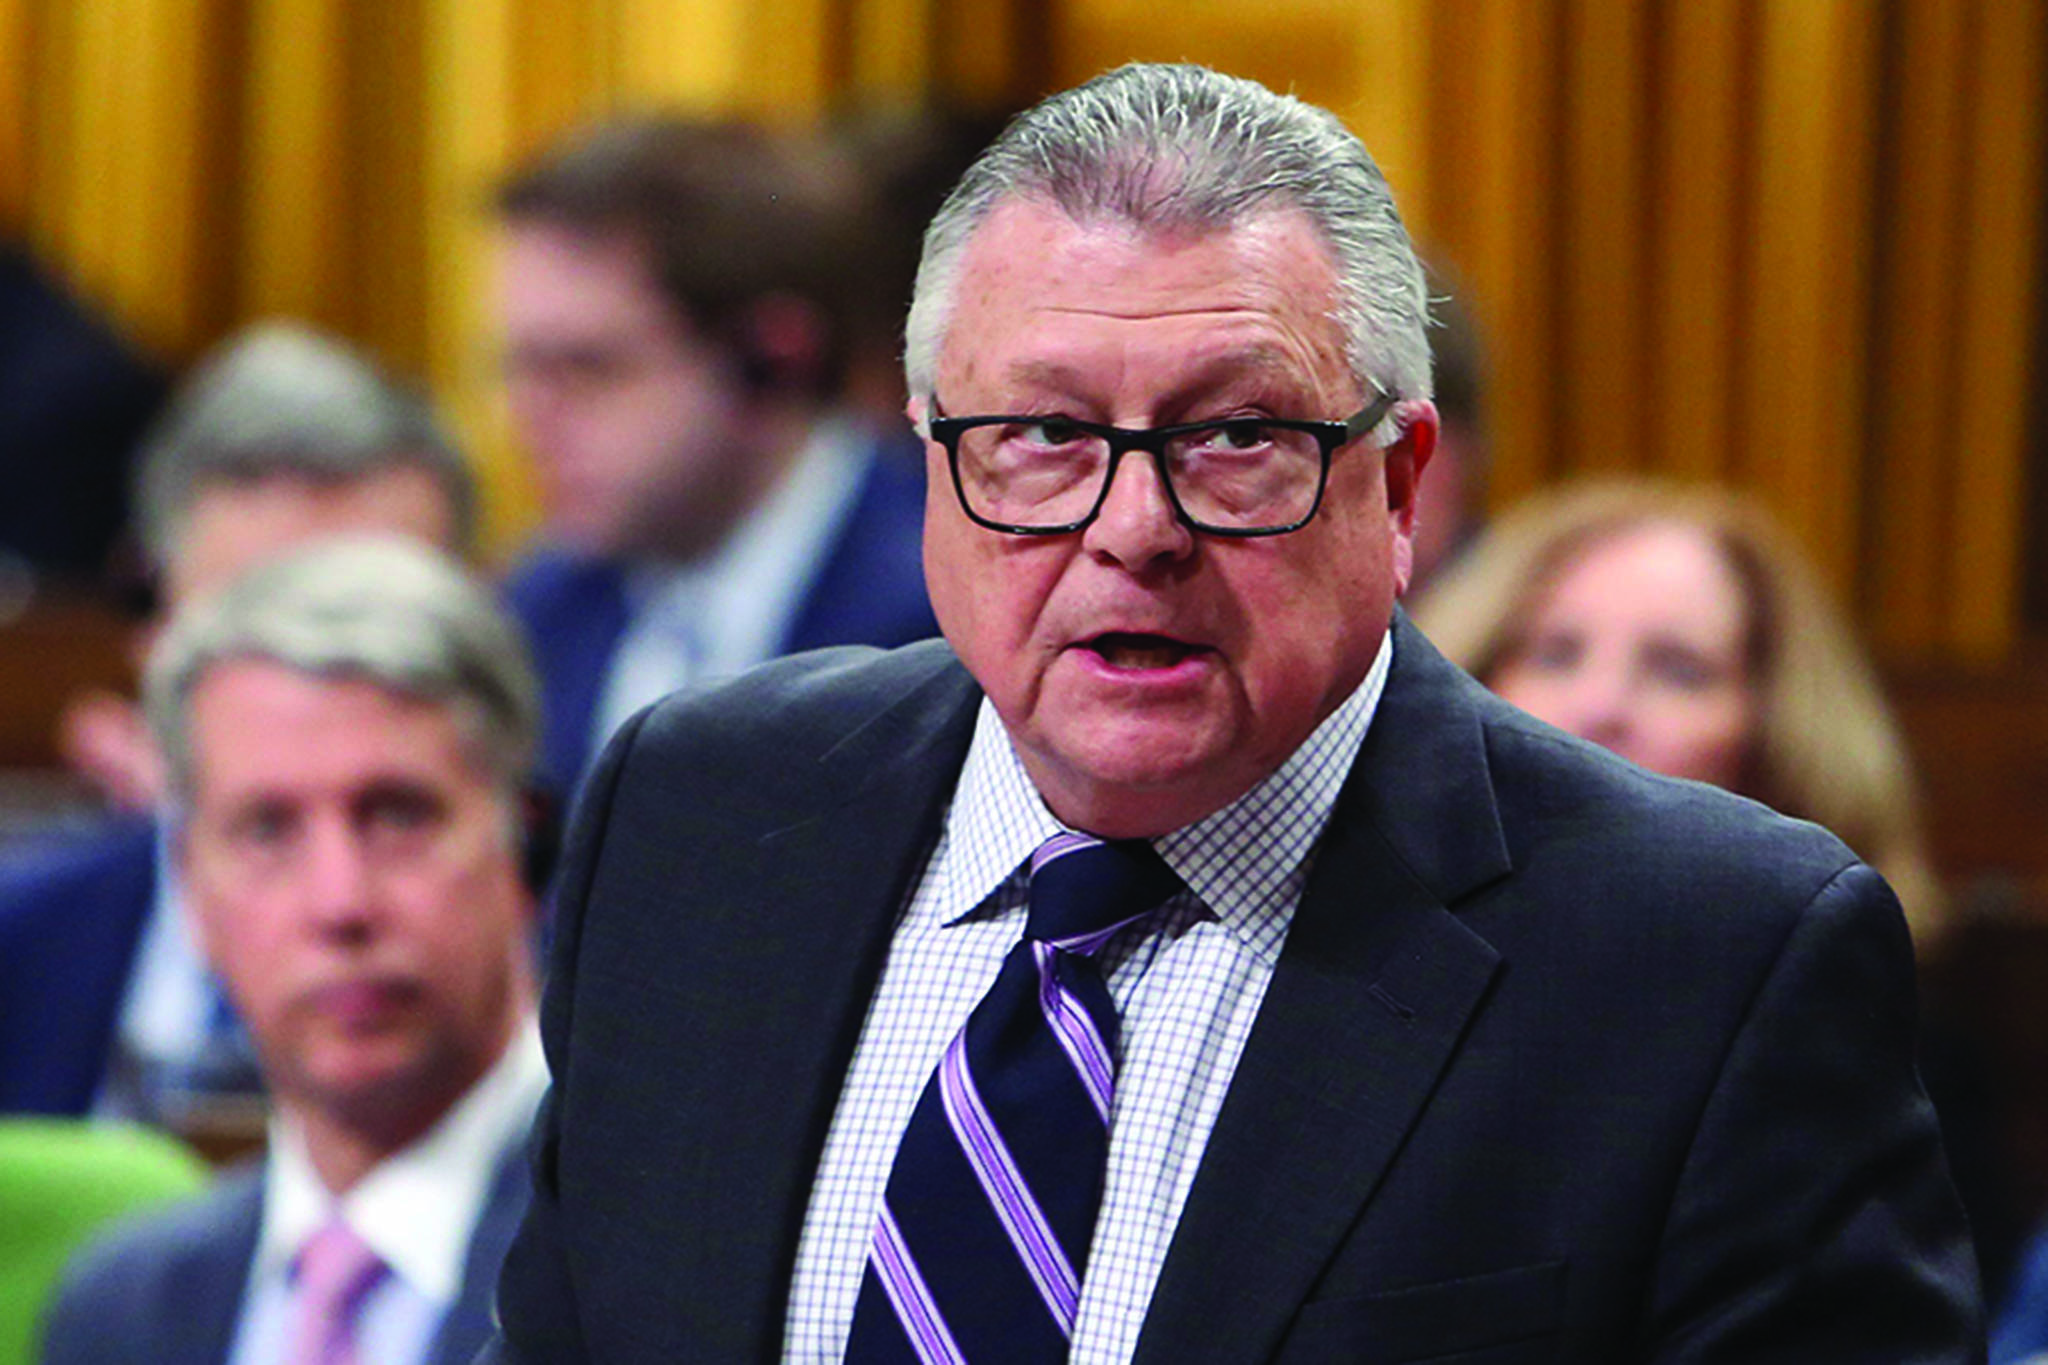 Public Safety Minister Ralph Goodale responds to a question during Question Period in the House of Commons Thursday, February 1, 2018 in Ottawa. THE CANADIAN PRESS/Fred Chartrand